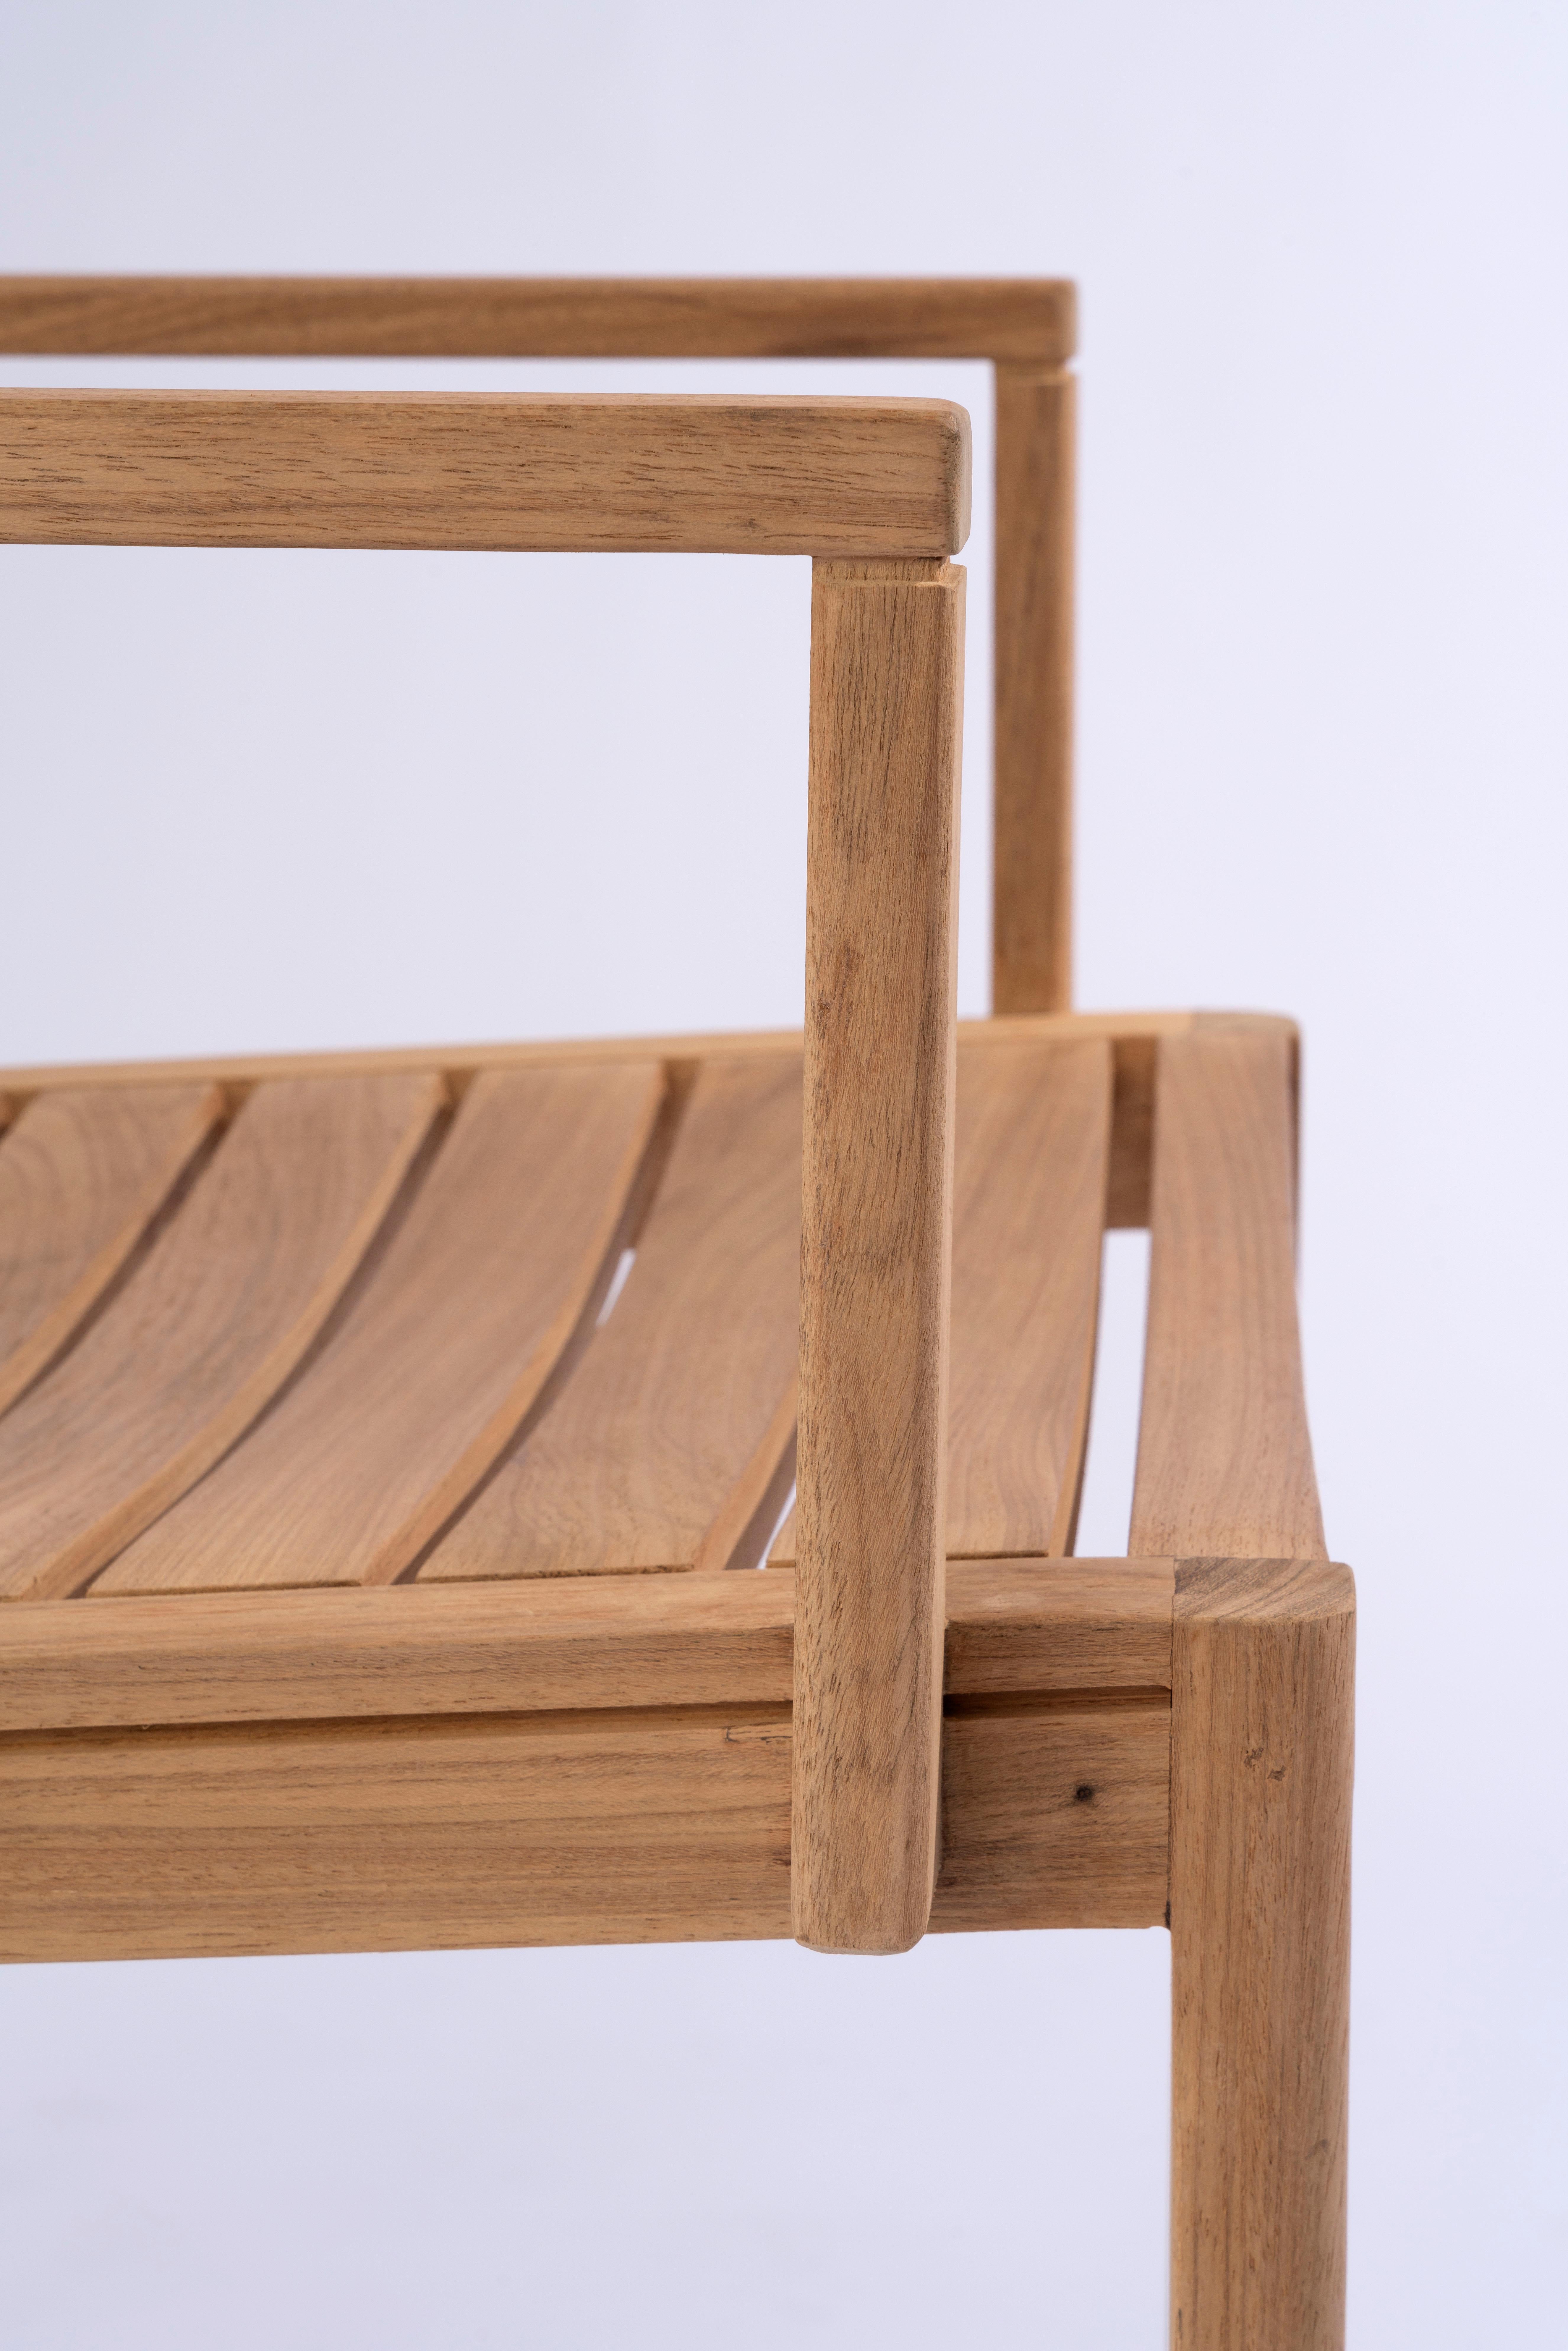 Brazilian Solid Wood Arms Chair with Wooden Slats, for the Outside, Outdoor Resistant For Sale